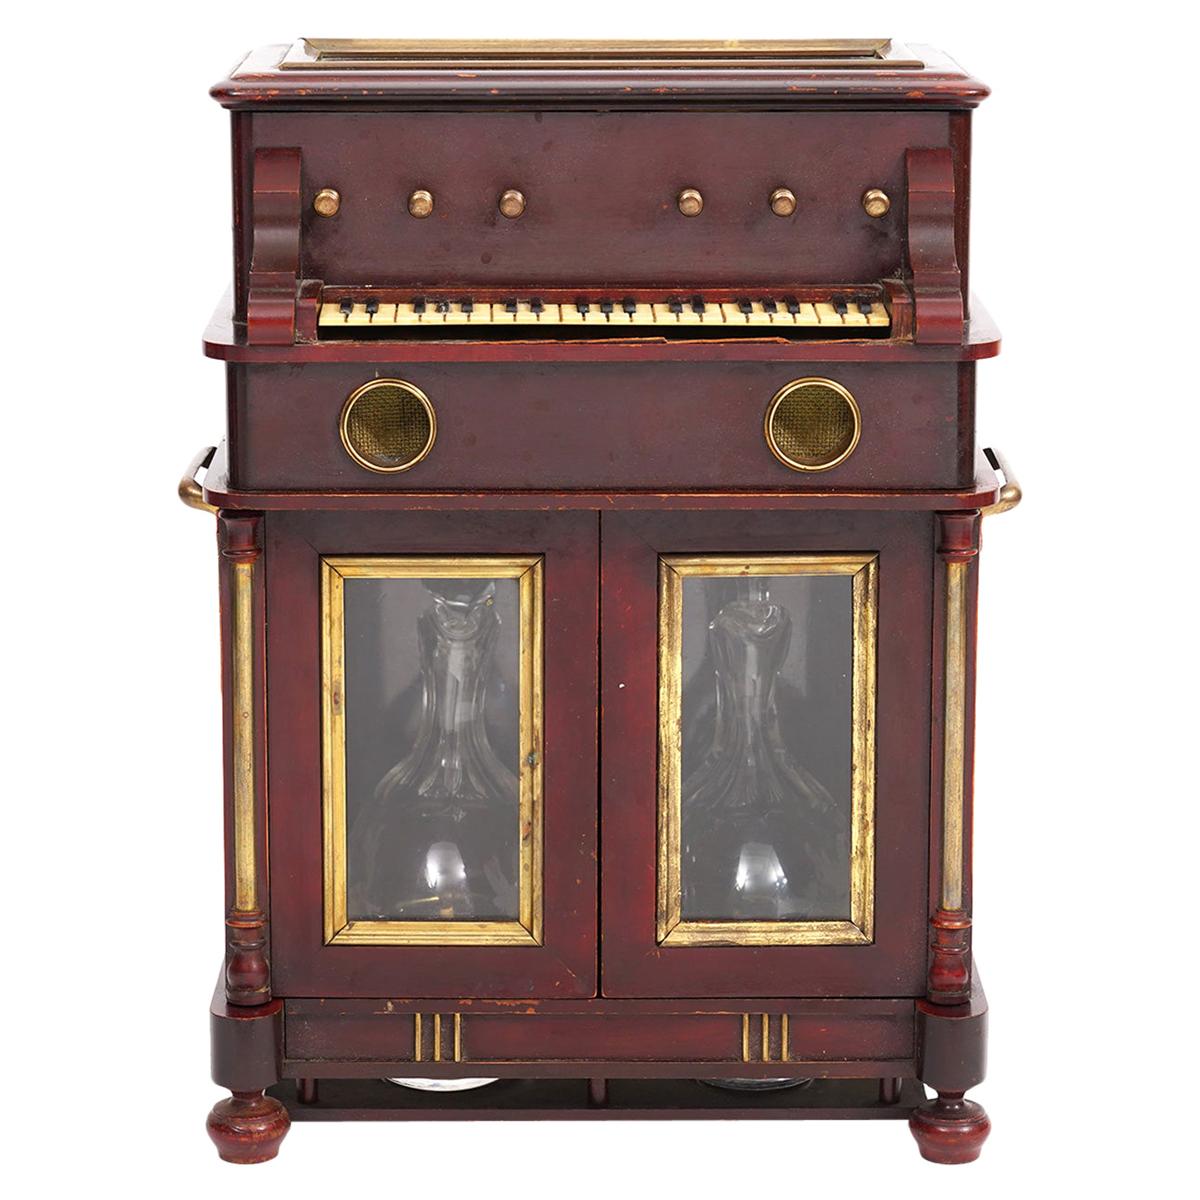 French 19th Century Upright Piano Design Music Box Tantalus or 'Cave a Liqueur'